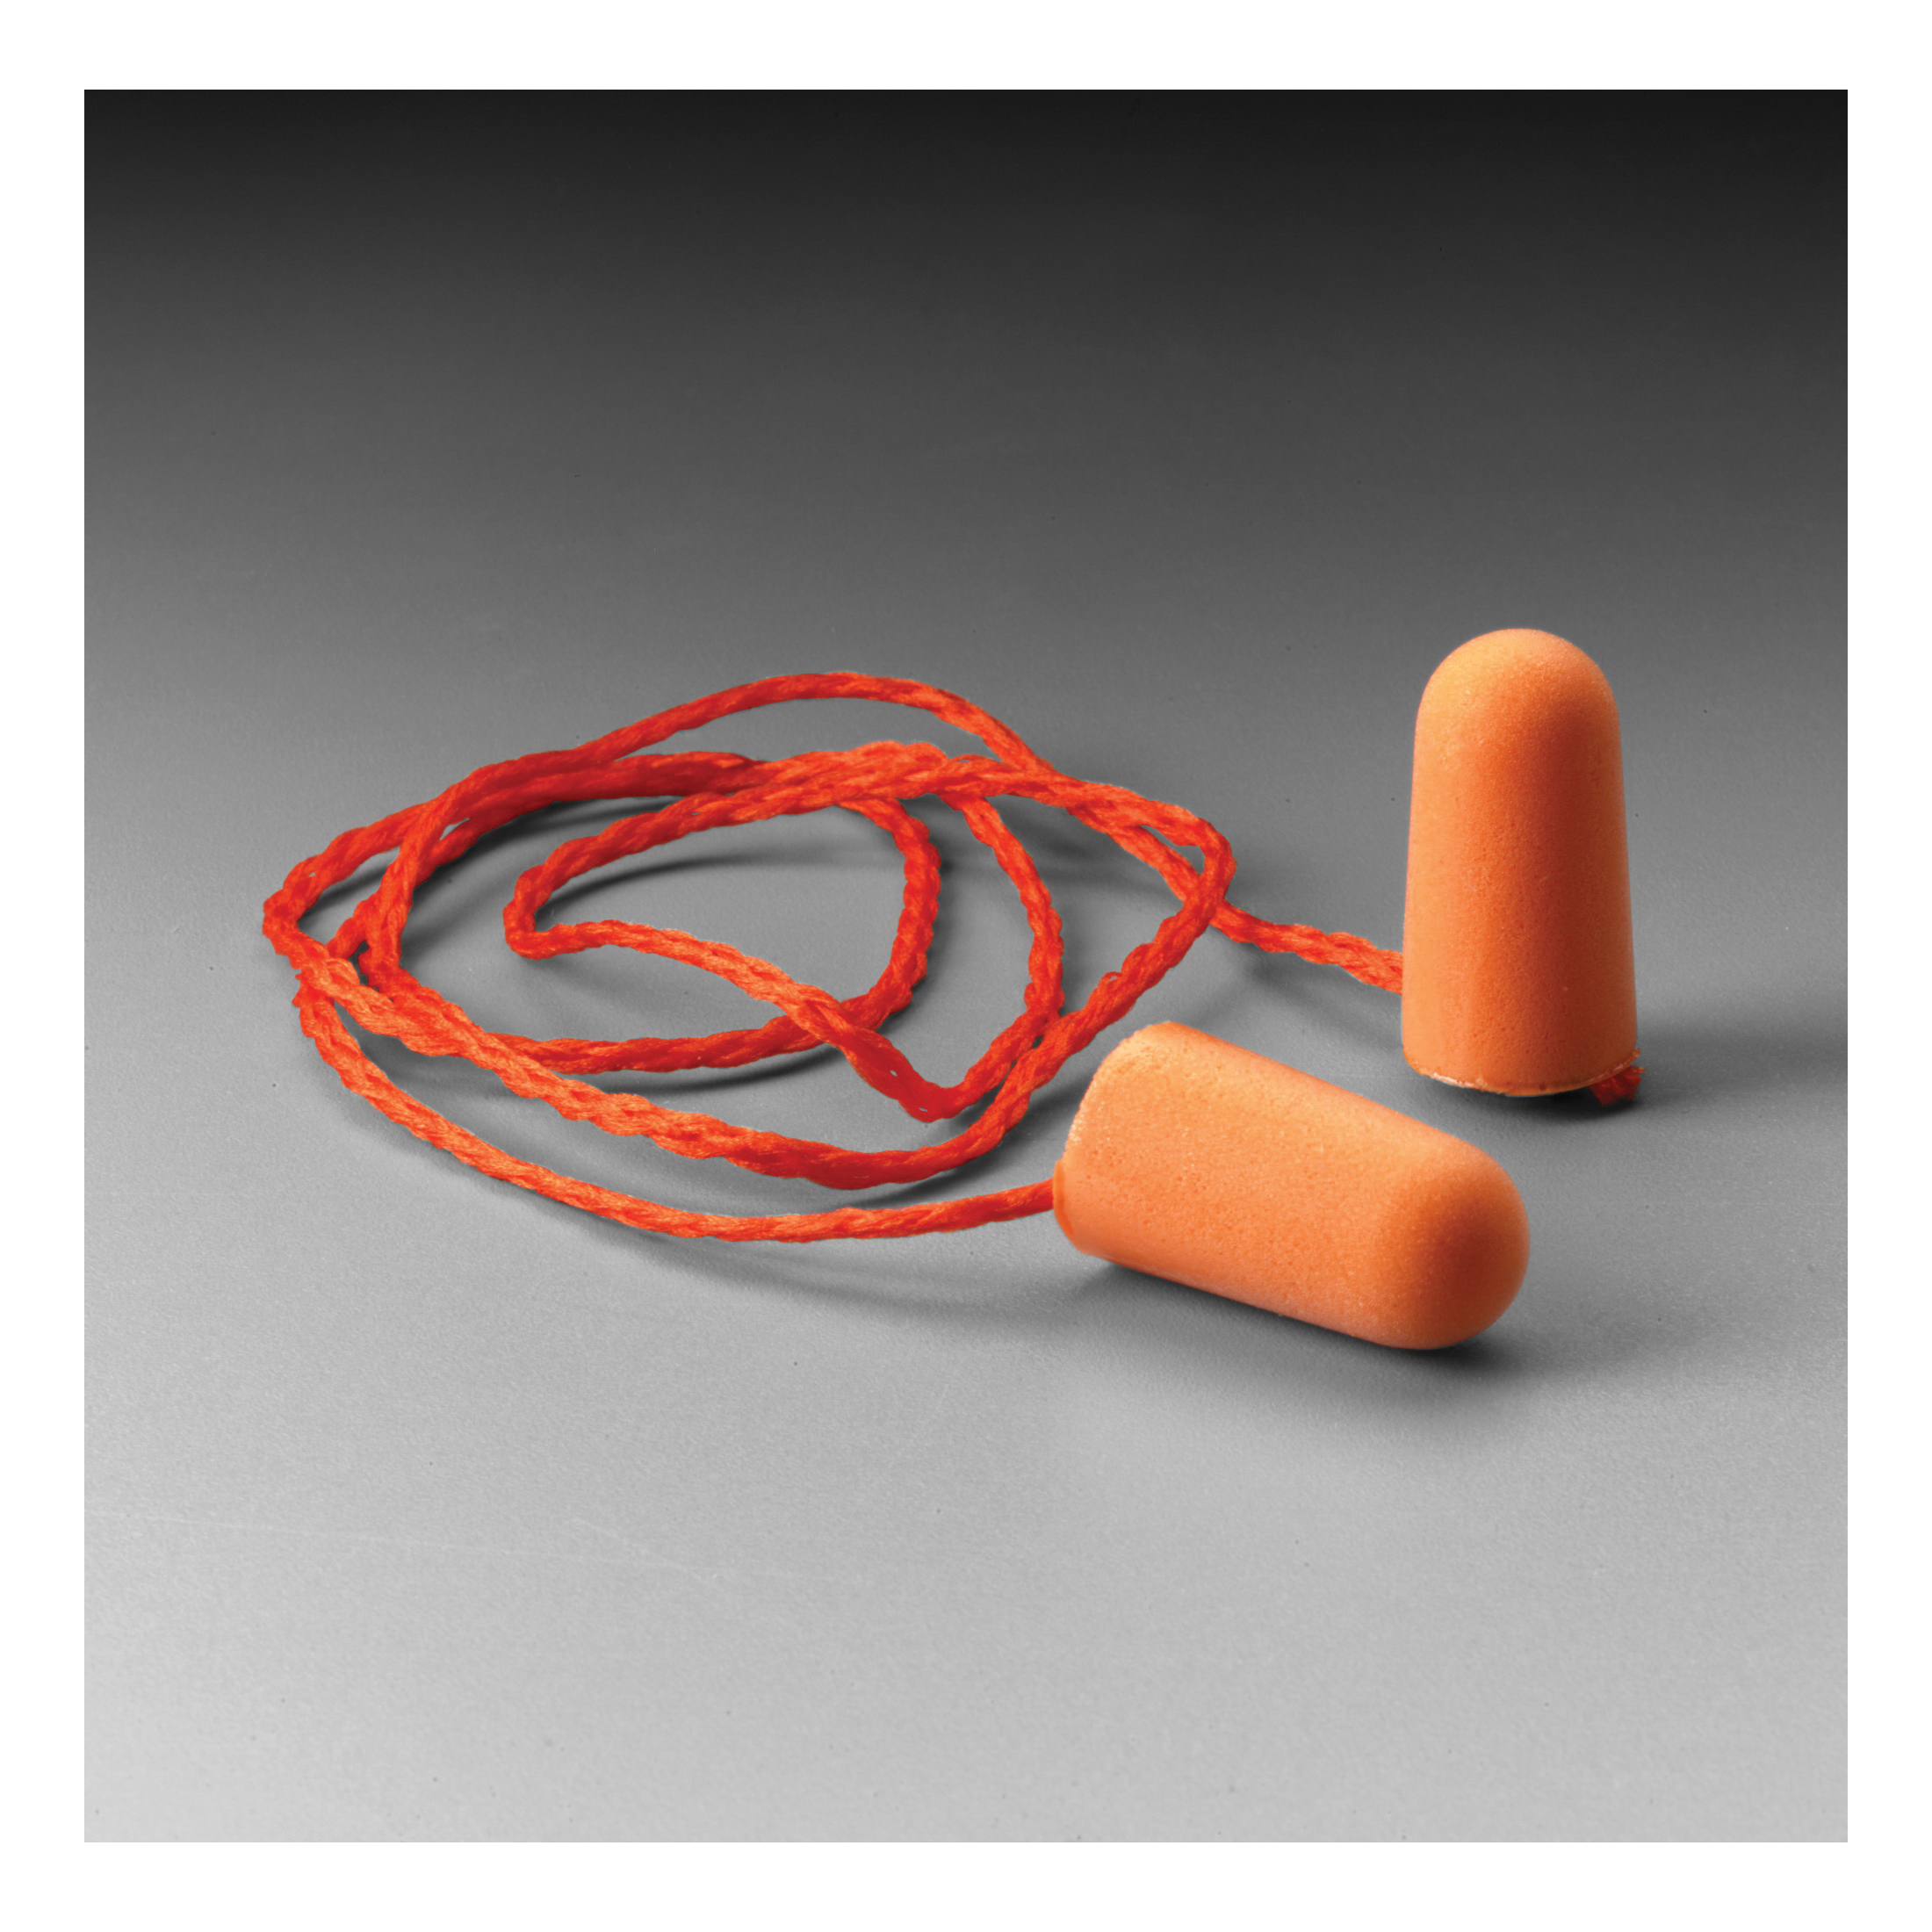 3M™ 051138-29009 Earplugs, 29 dB Noise Reduction, Tapered Shape, CSA Class AL, Disposable, Corded Design